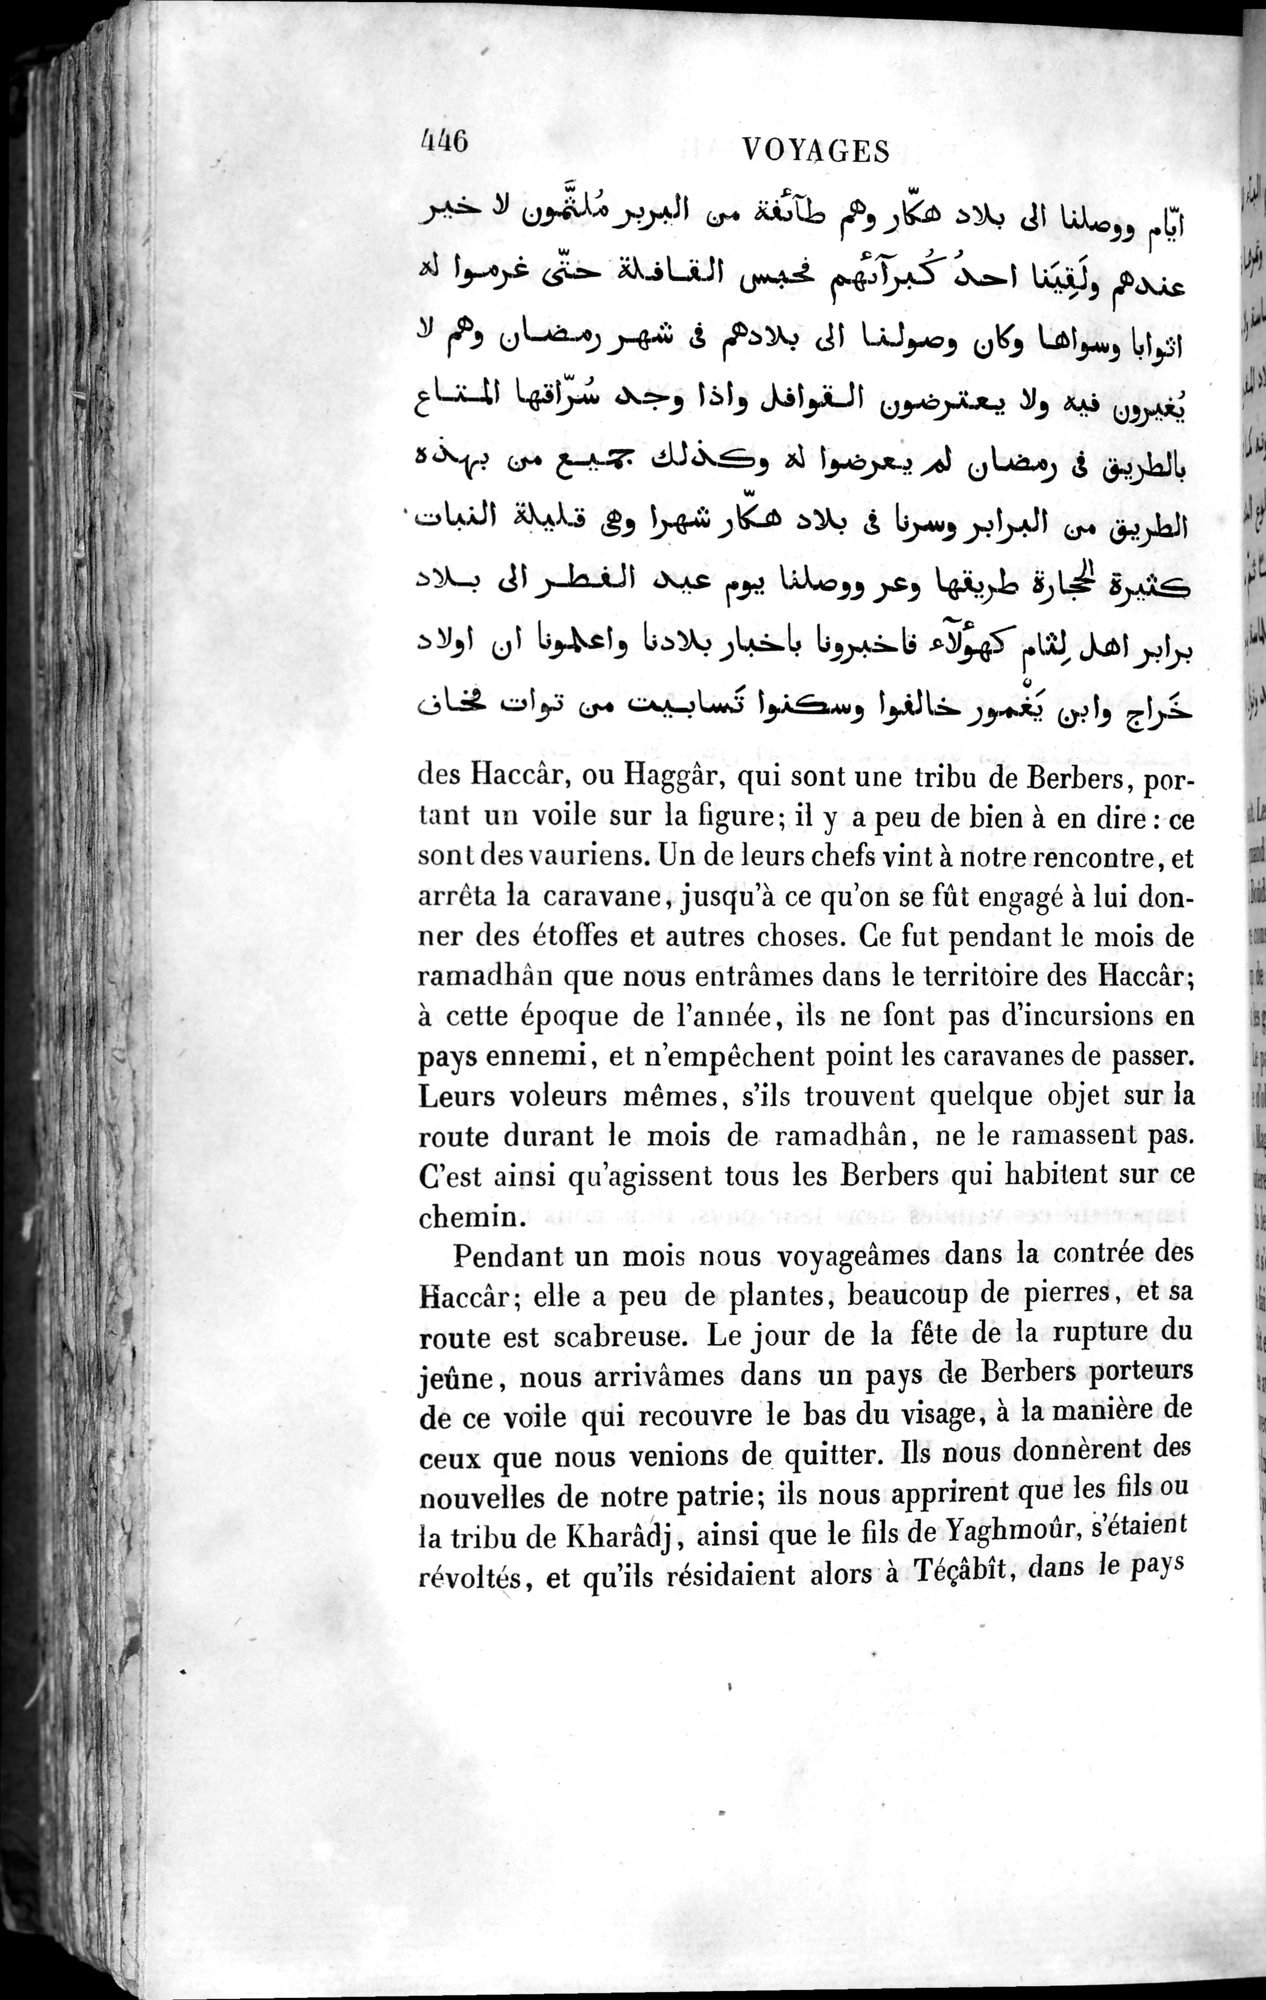 Voyages d'Ibn Batoutah : vol.4 / Page 458 (Grayscale High Resolution Image)